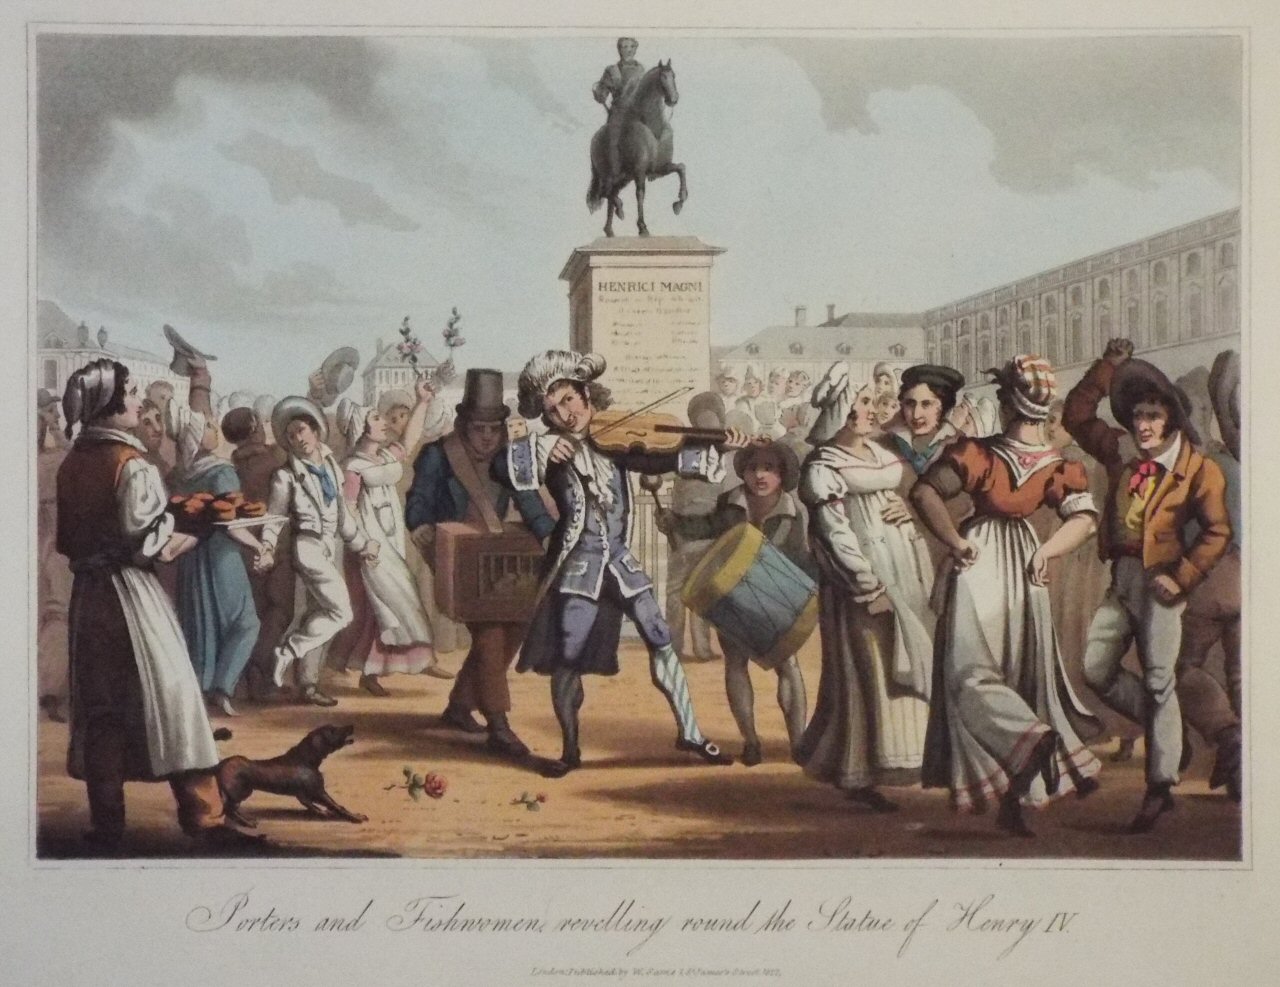 Aquatint - Porters and Fishwomen revelling round the Statue of Henry IV.